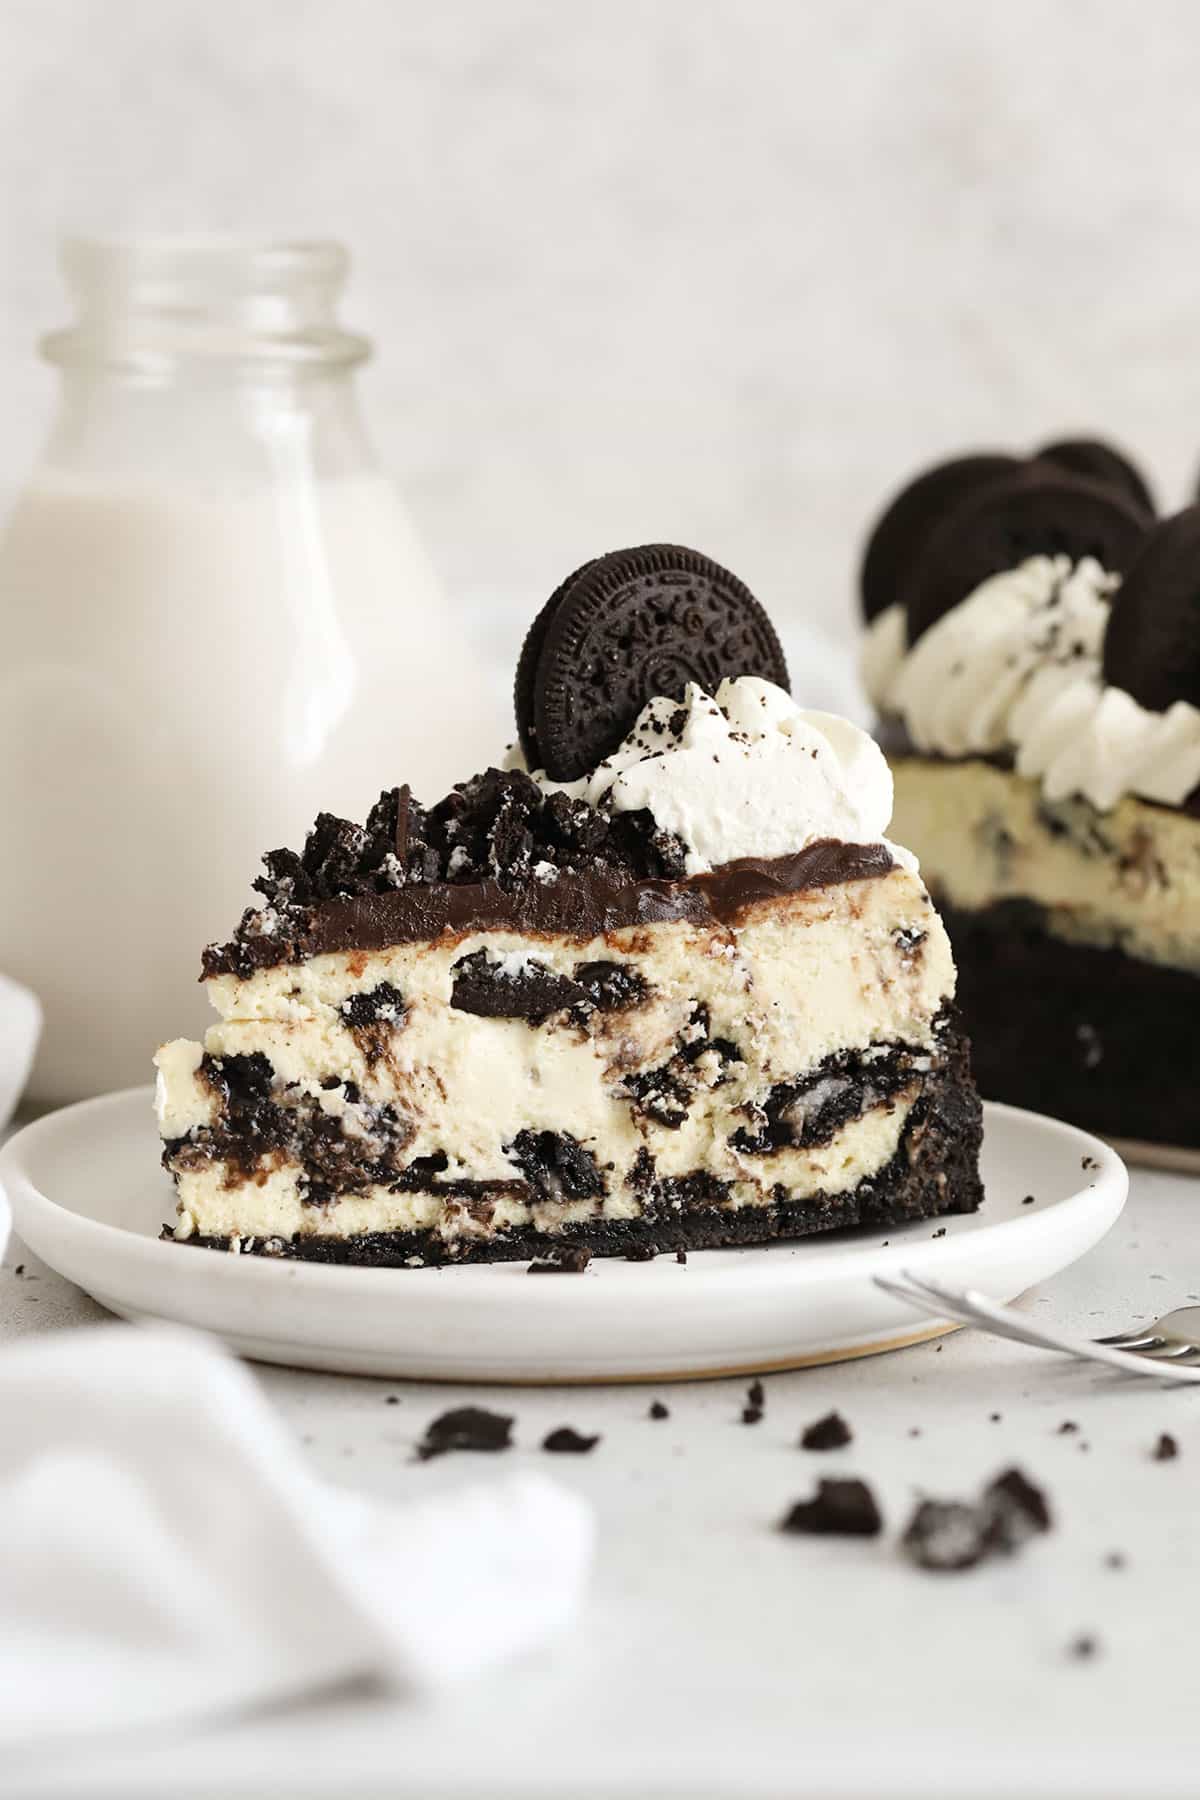 slice of gluten-free Oreo cheesecake topped with chocolate ganache, chopped Oreo cookies, and whipped cream